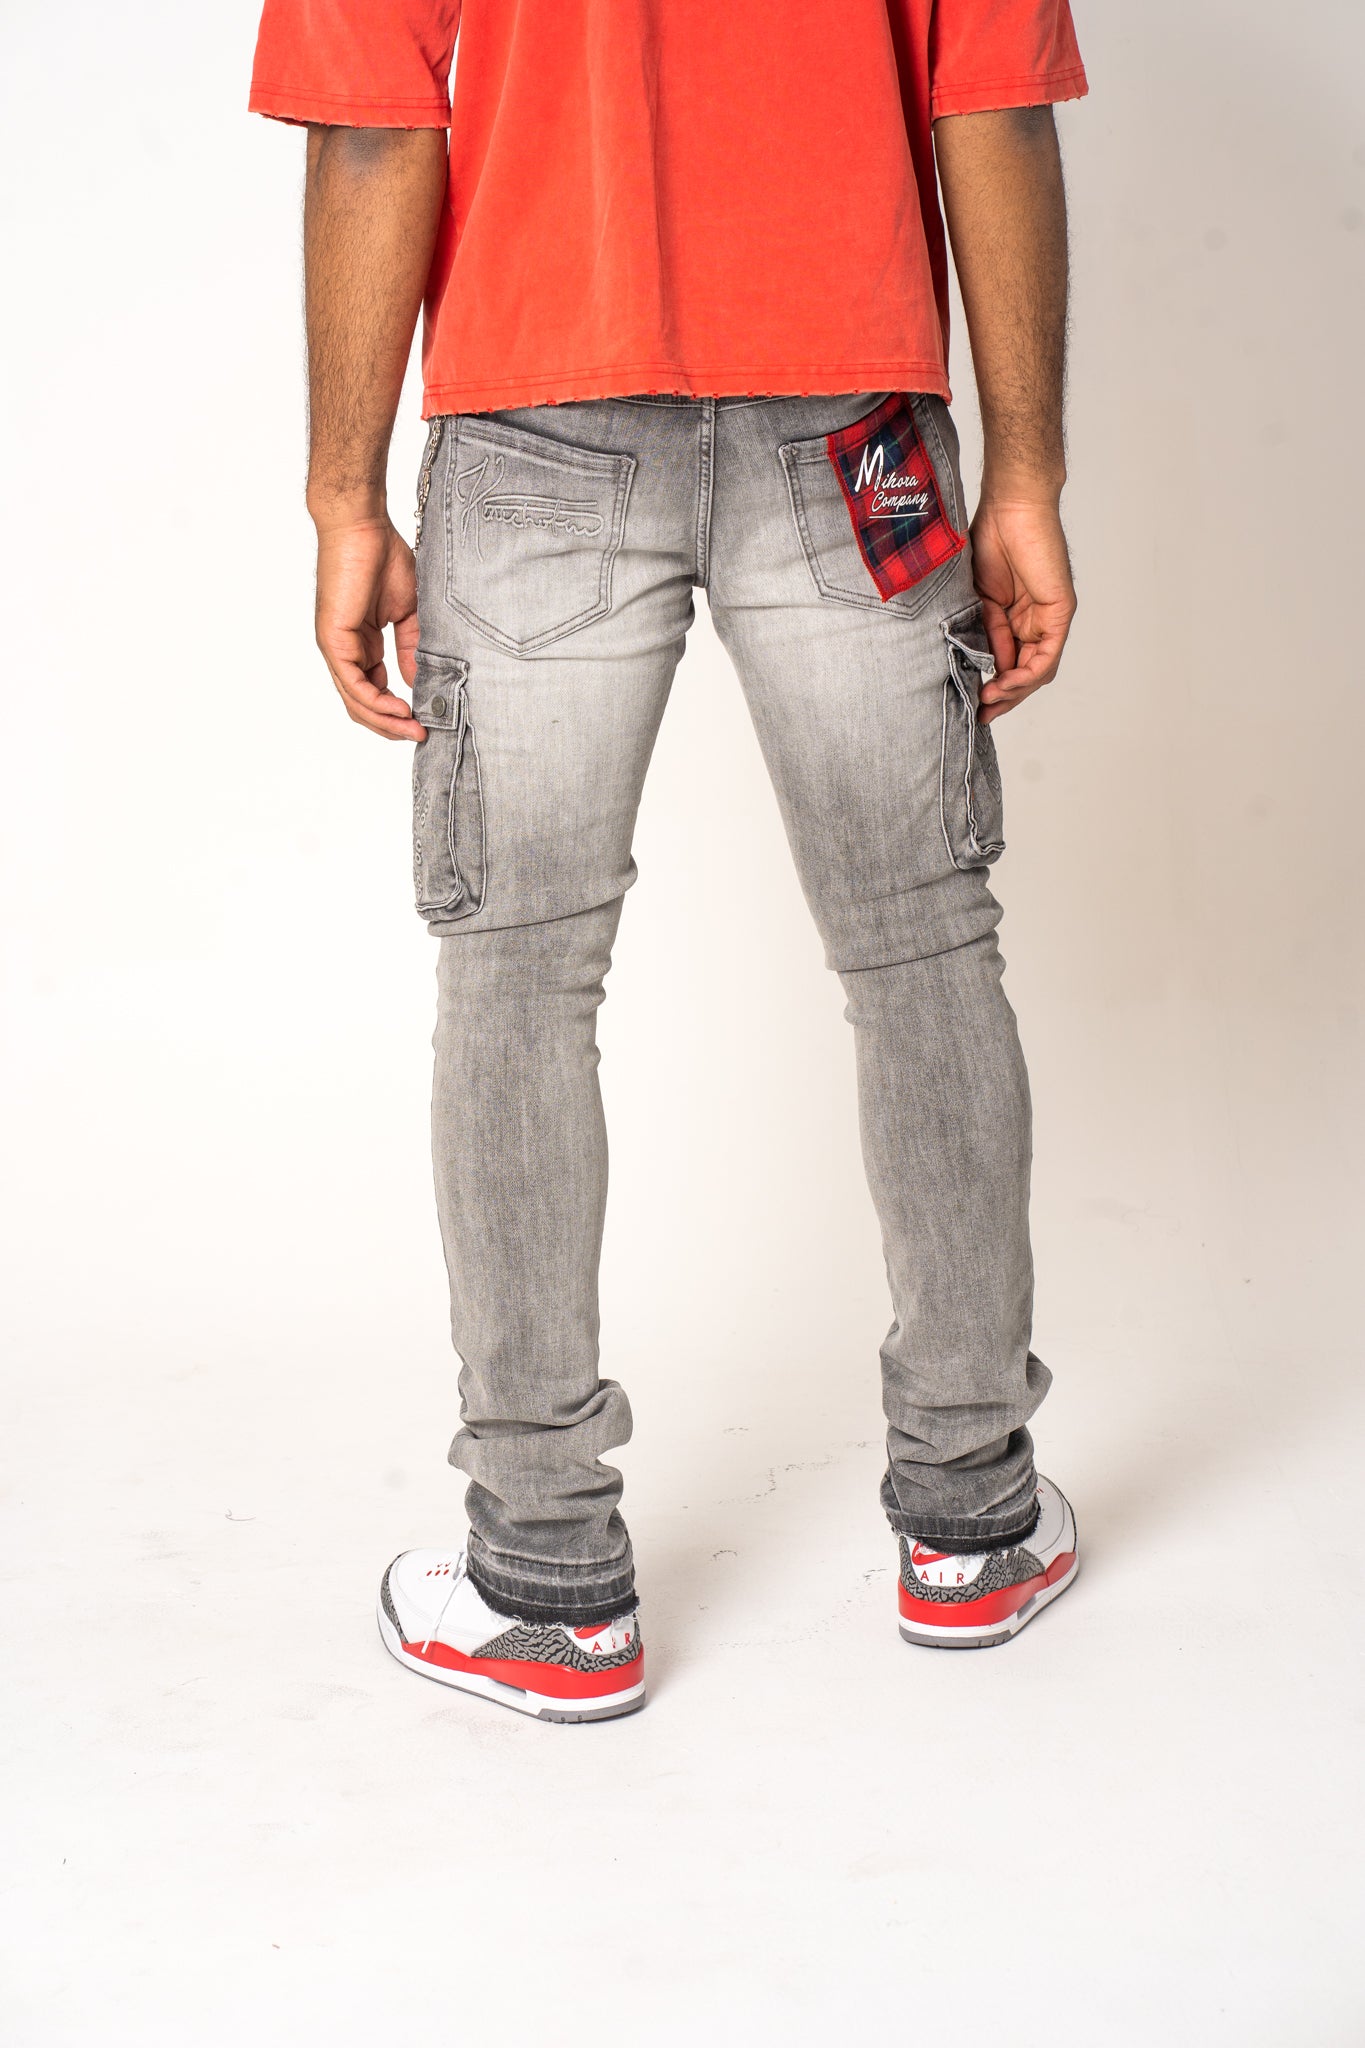 W.I.A.S Stacked Jeans (Light Wash)